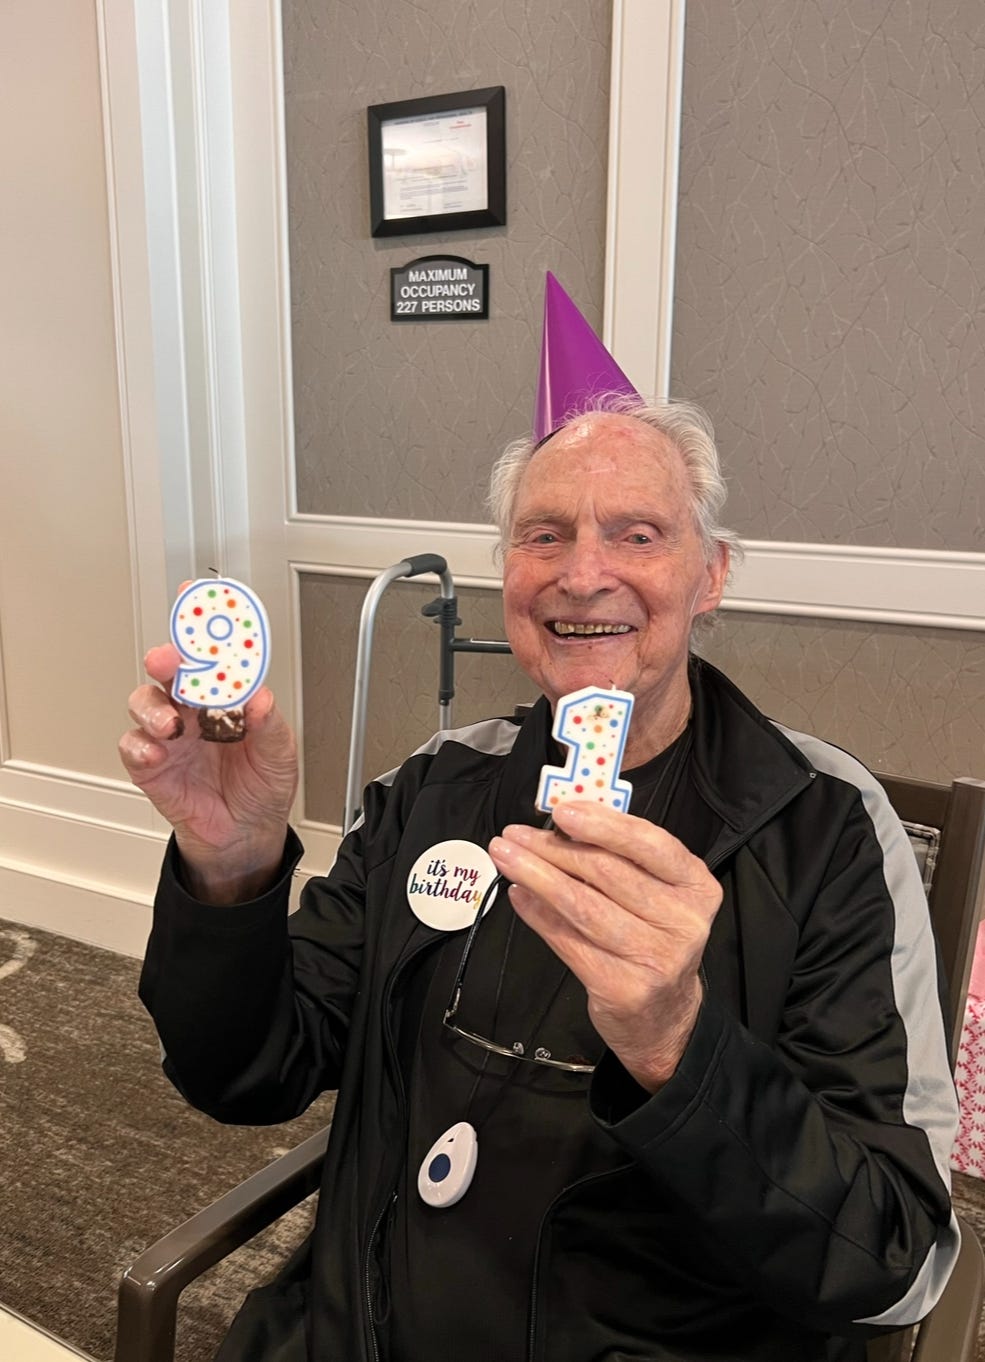 A 91-year-old man holds up two candles, 9 and 1, to celebrate his birthday and smiles at the camera.